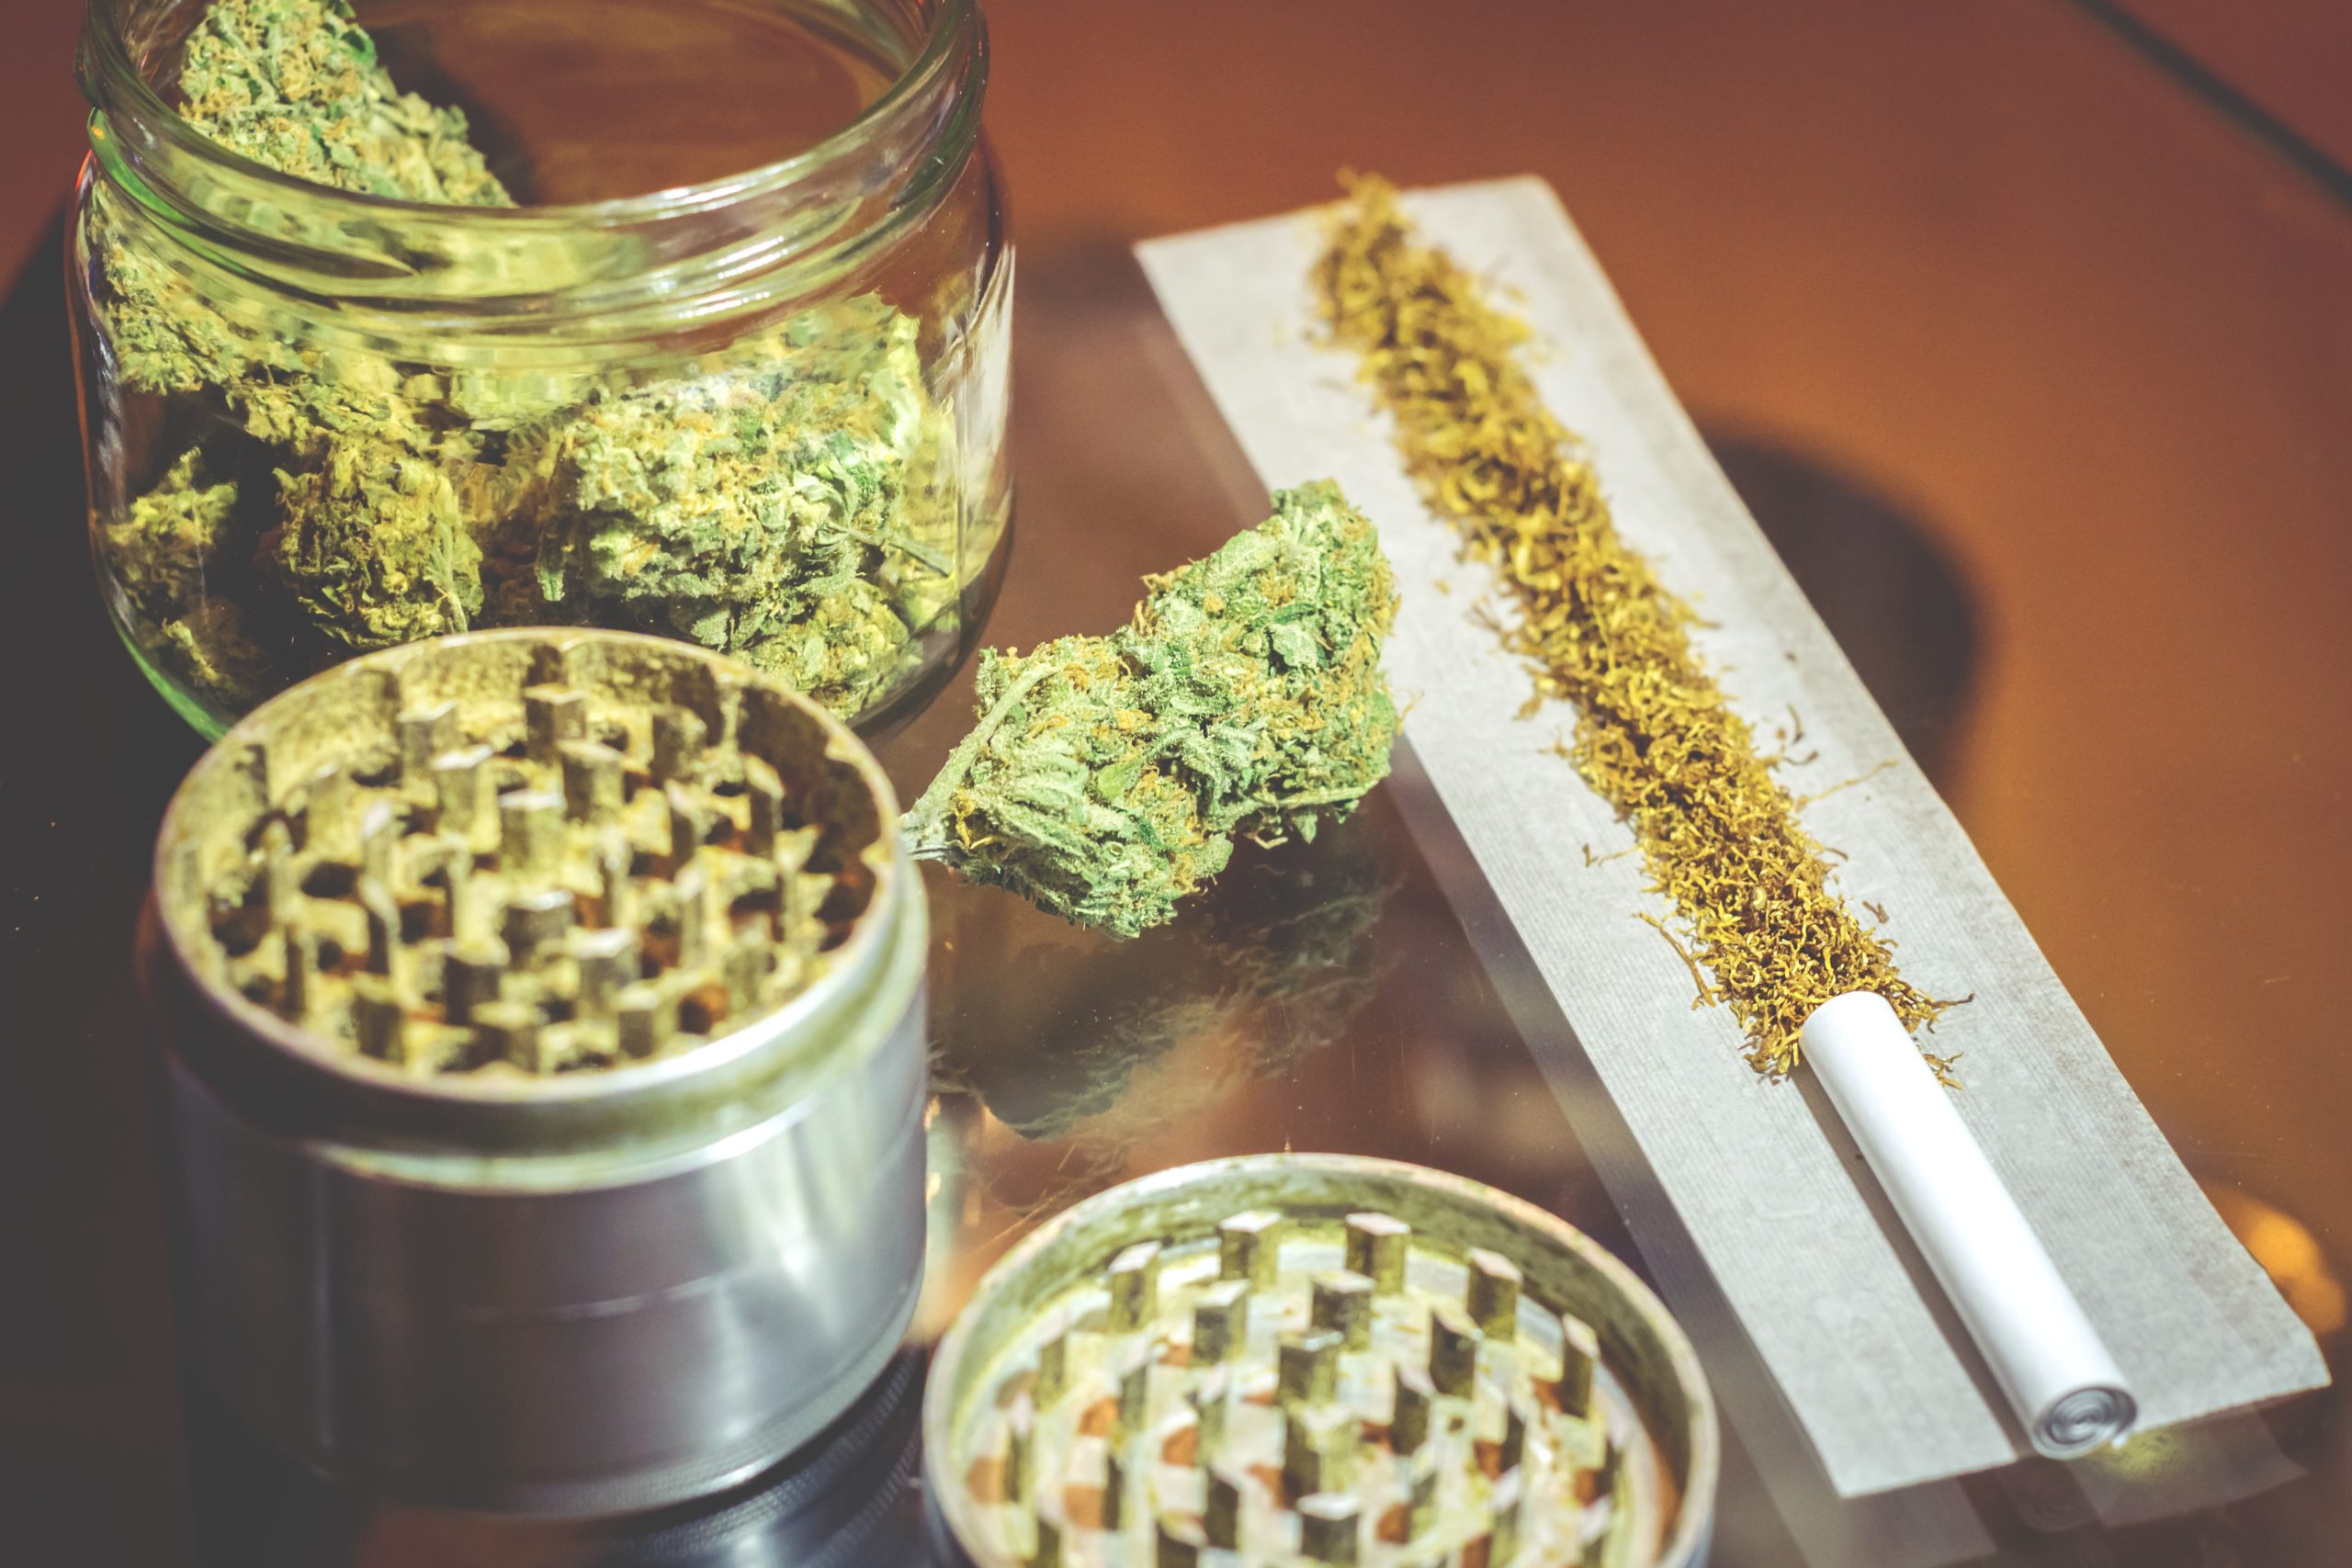 The Differences Between Medical and Recreational Cannabis